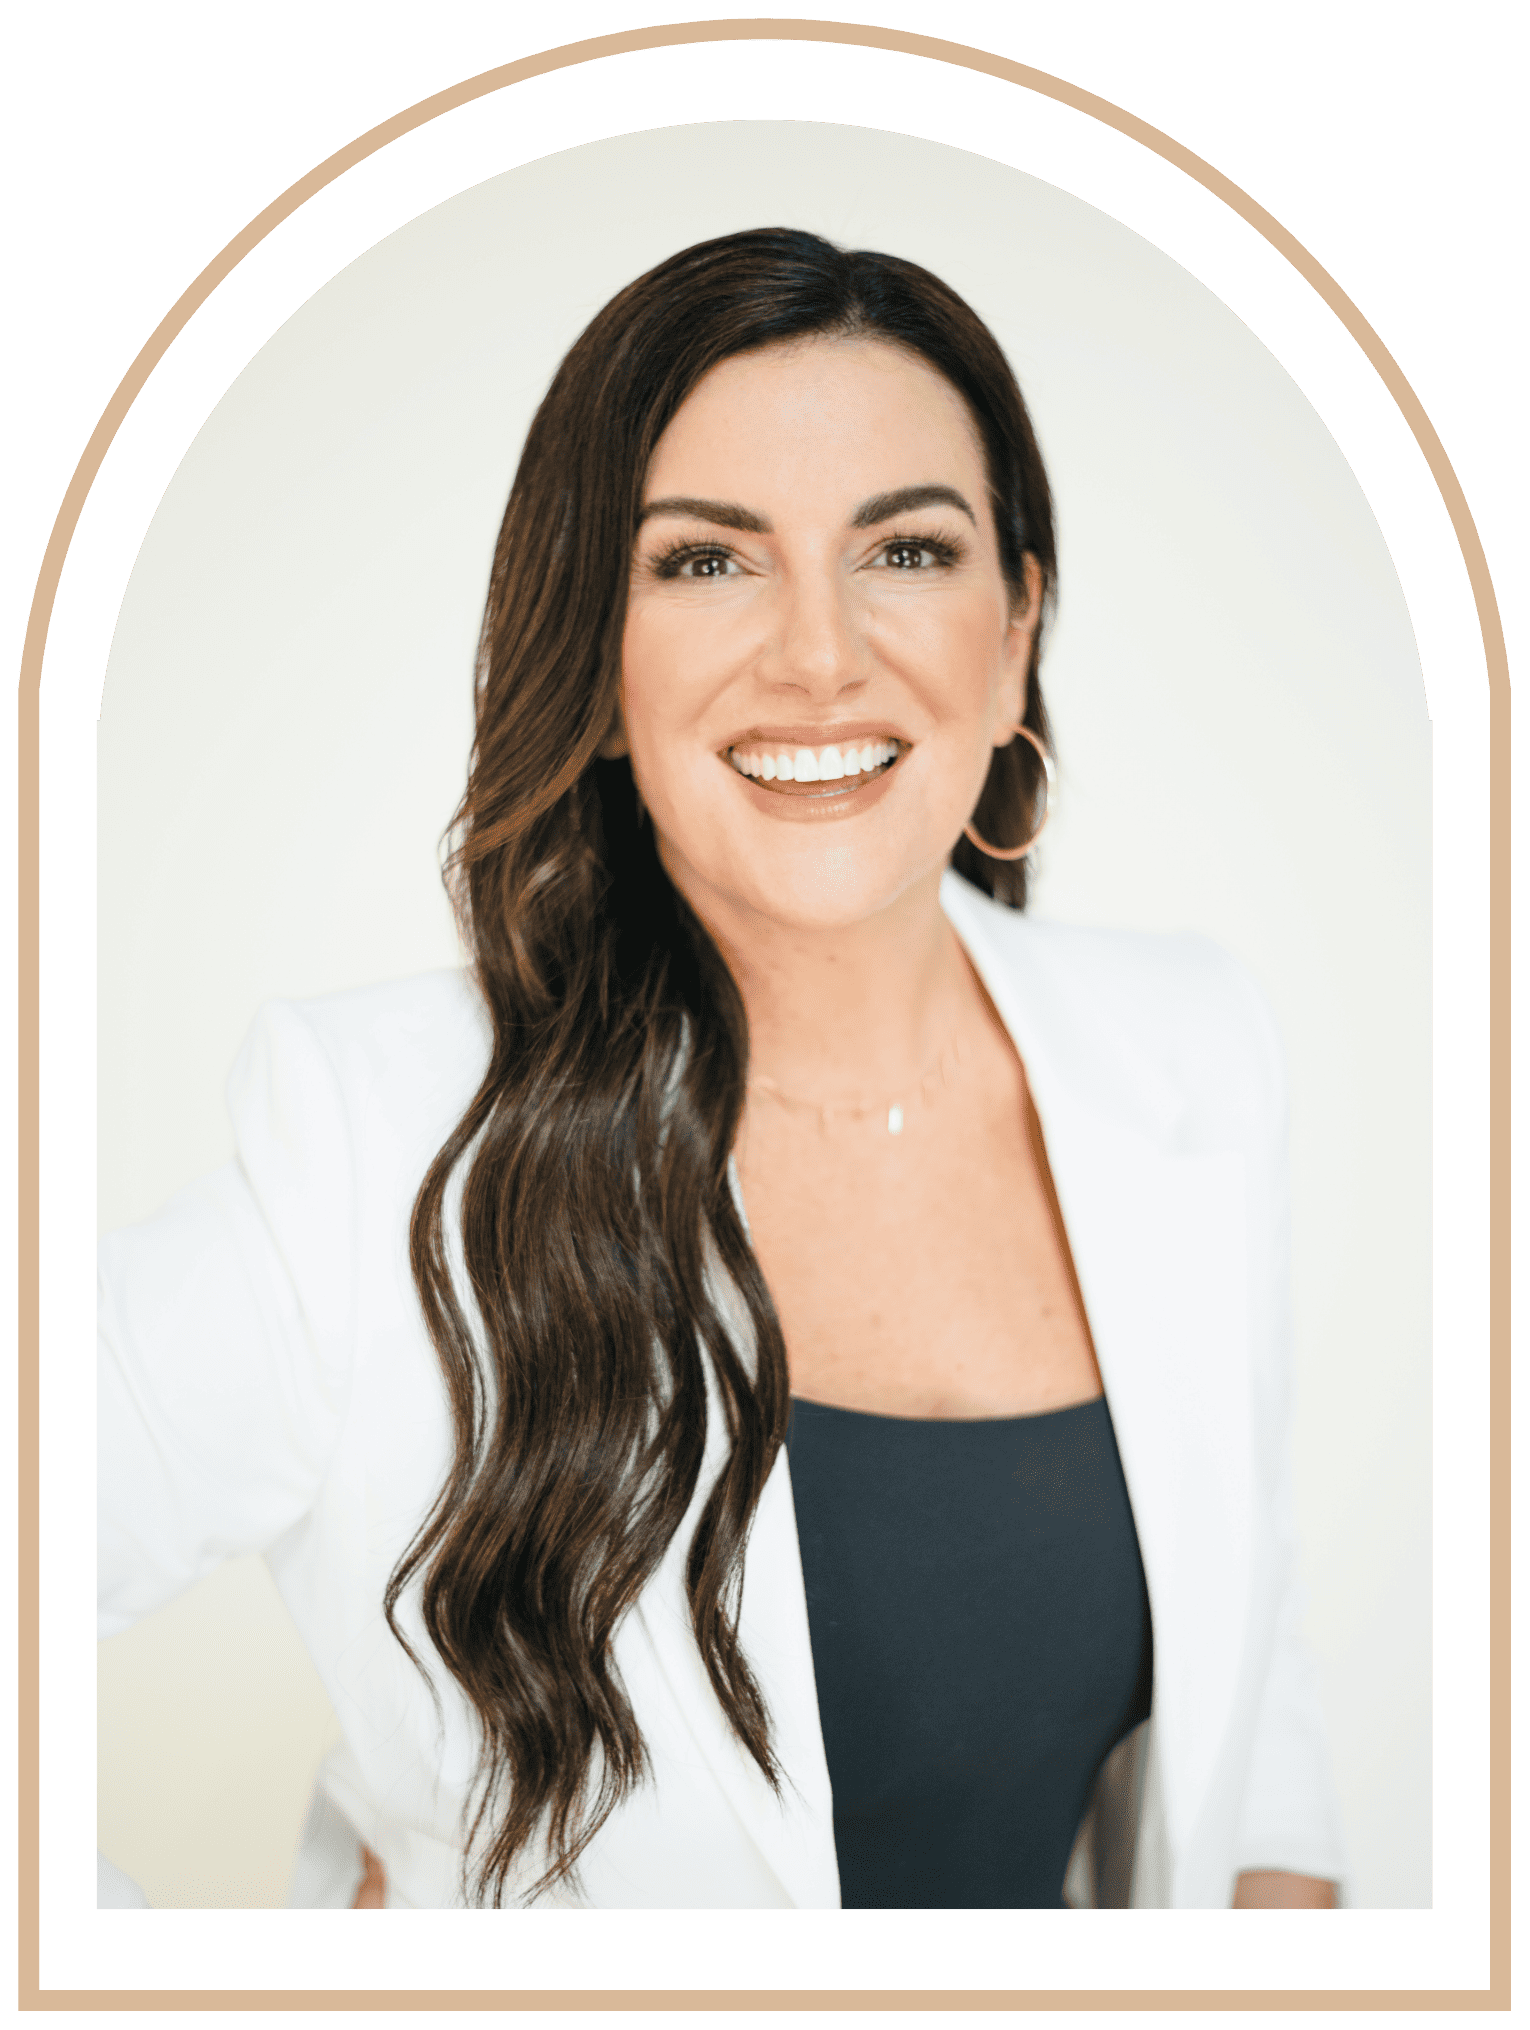 amy porterfield smiling at camera